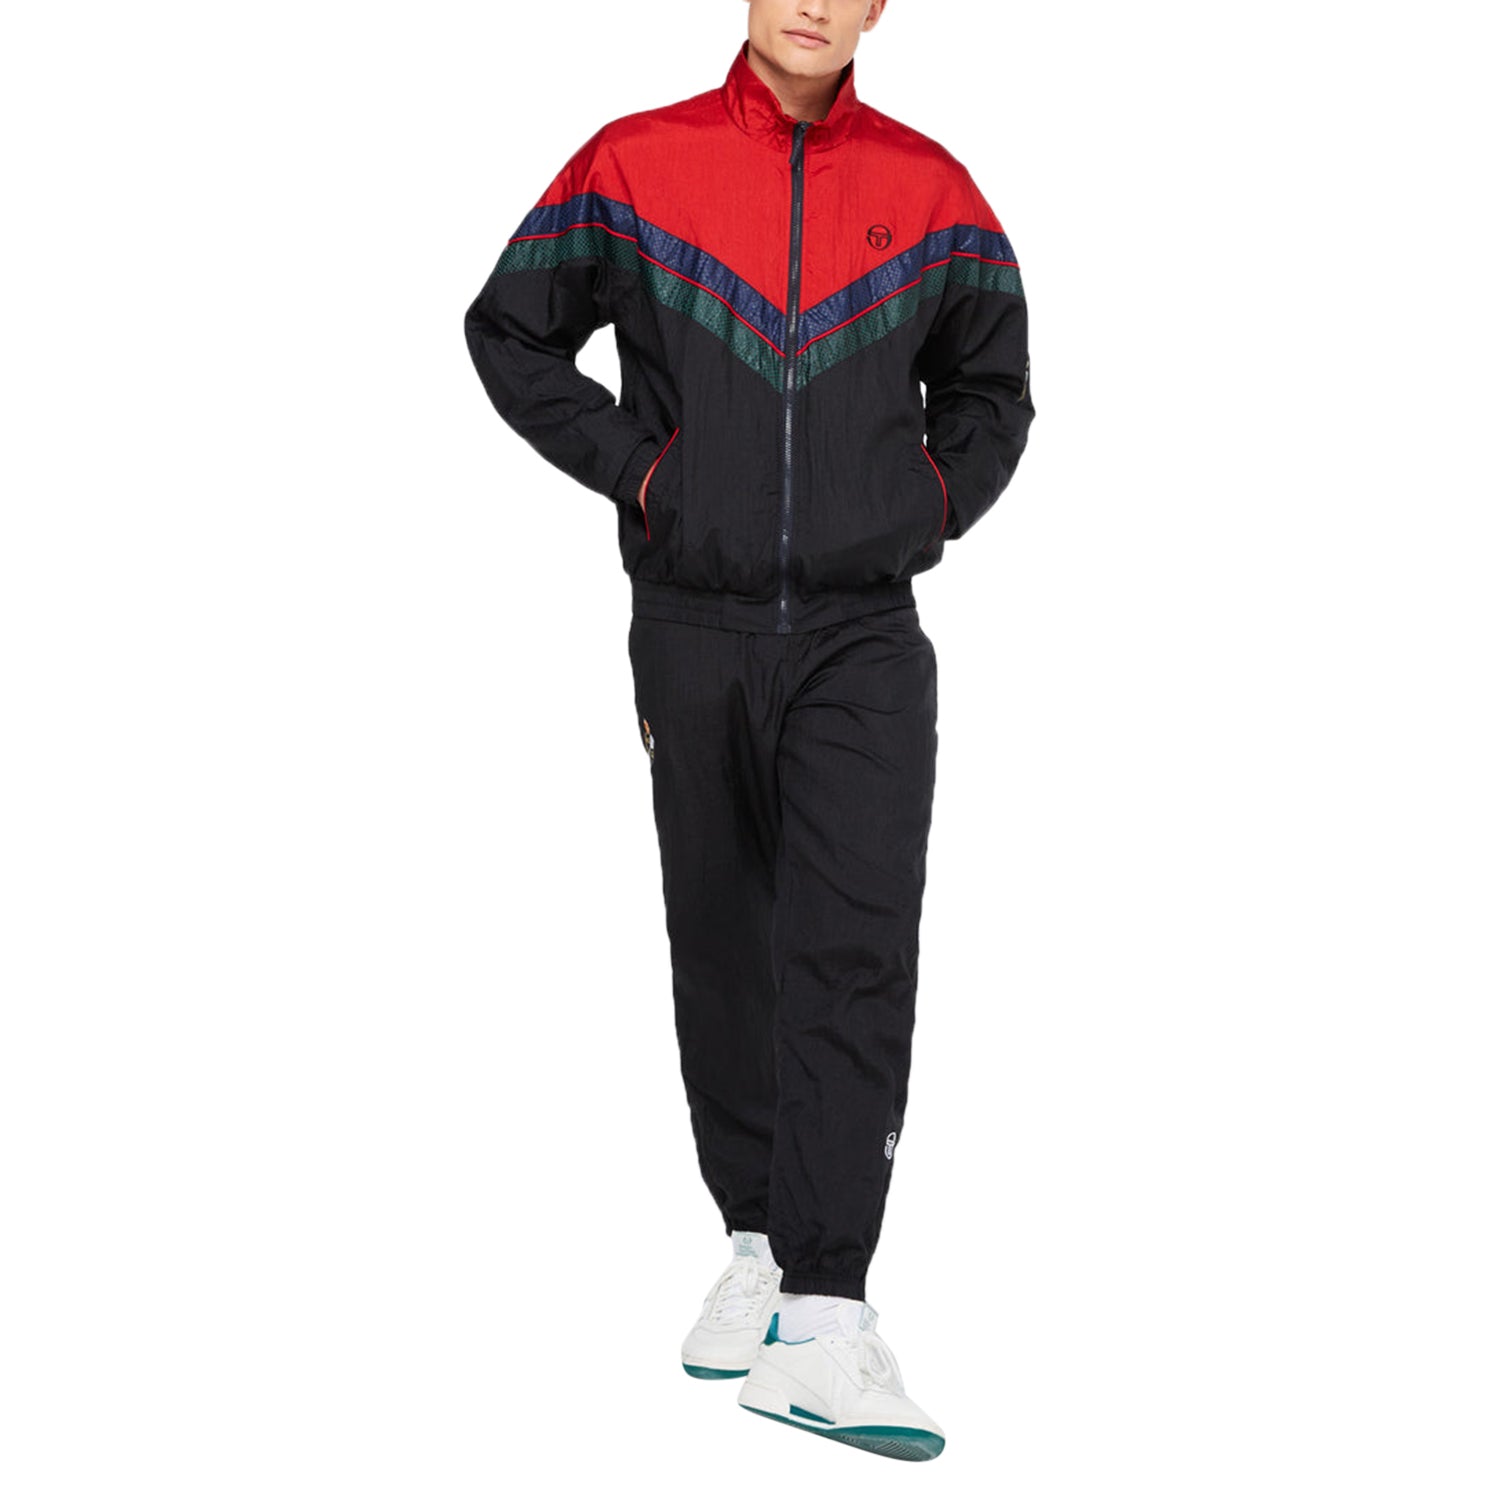 Sergio Tacchini Monte Carlo Tracksuit Mens Style : Sts22m50264